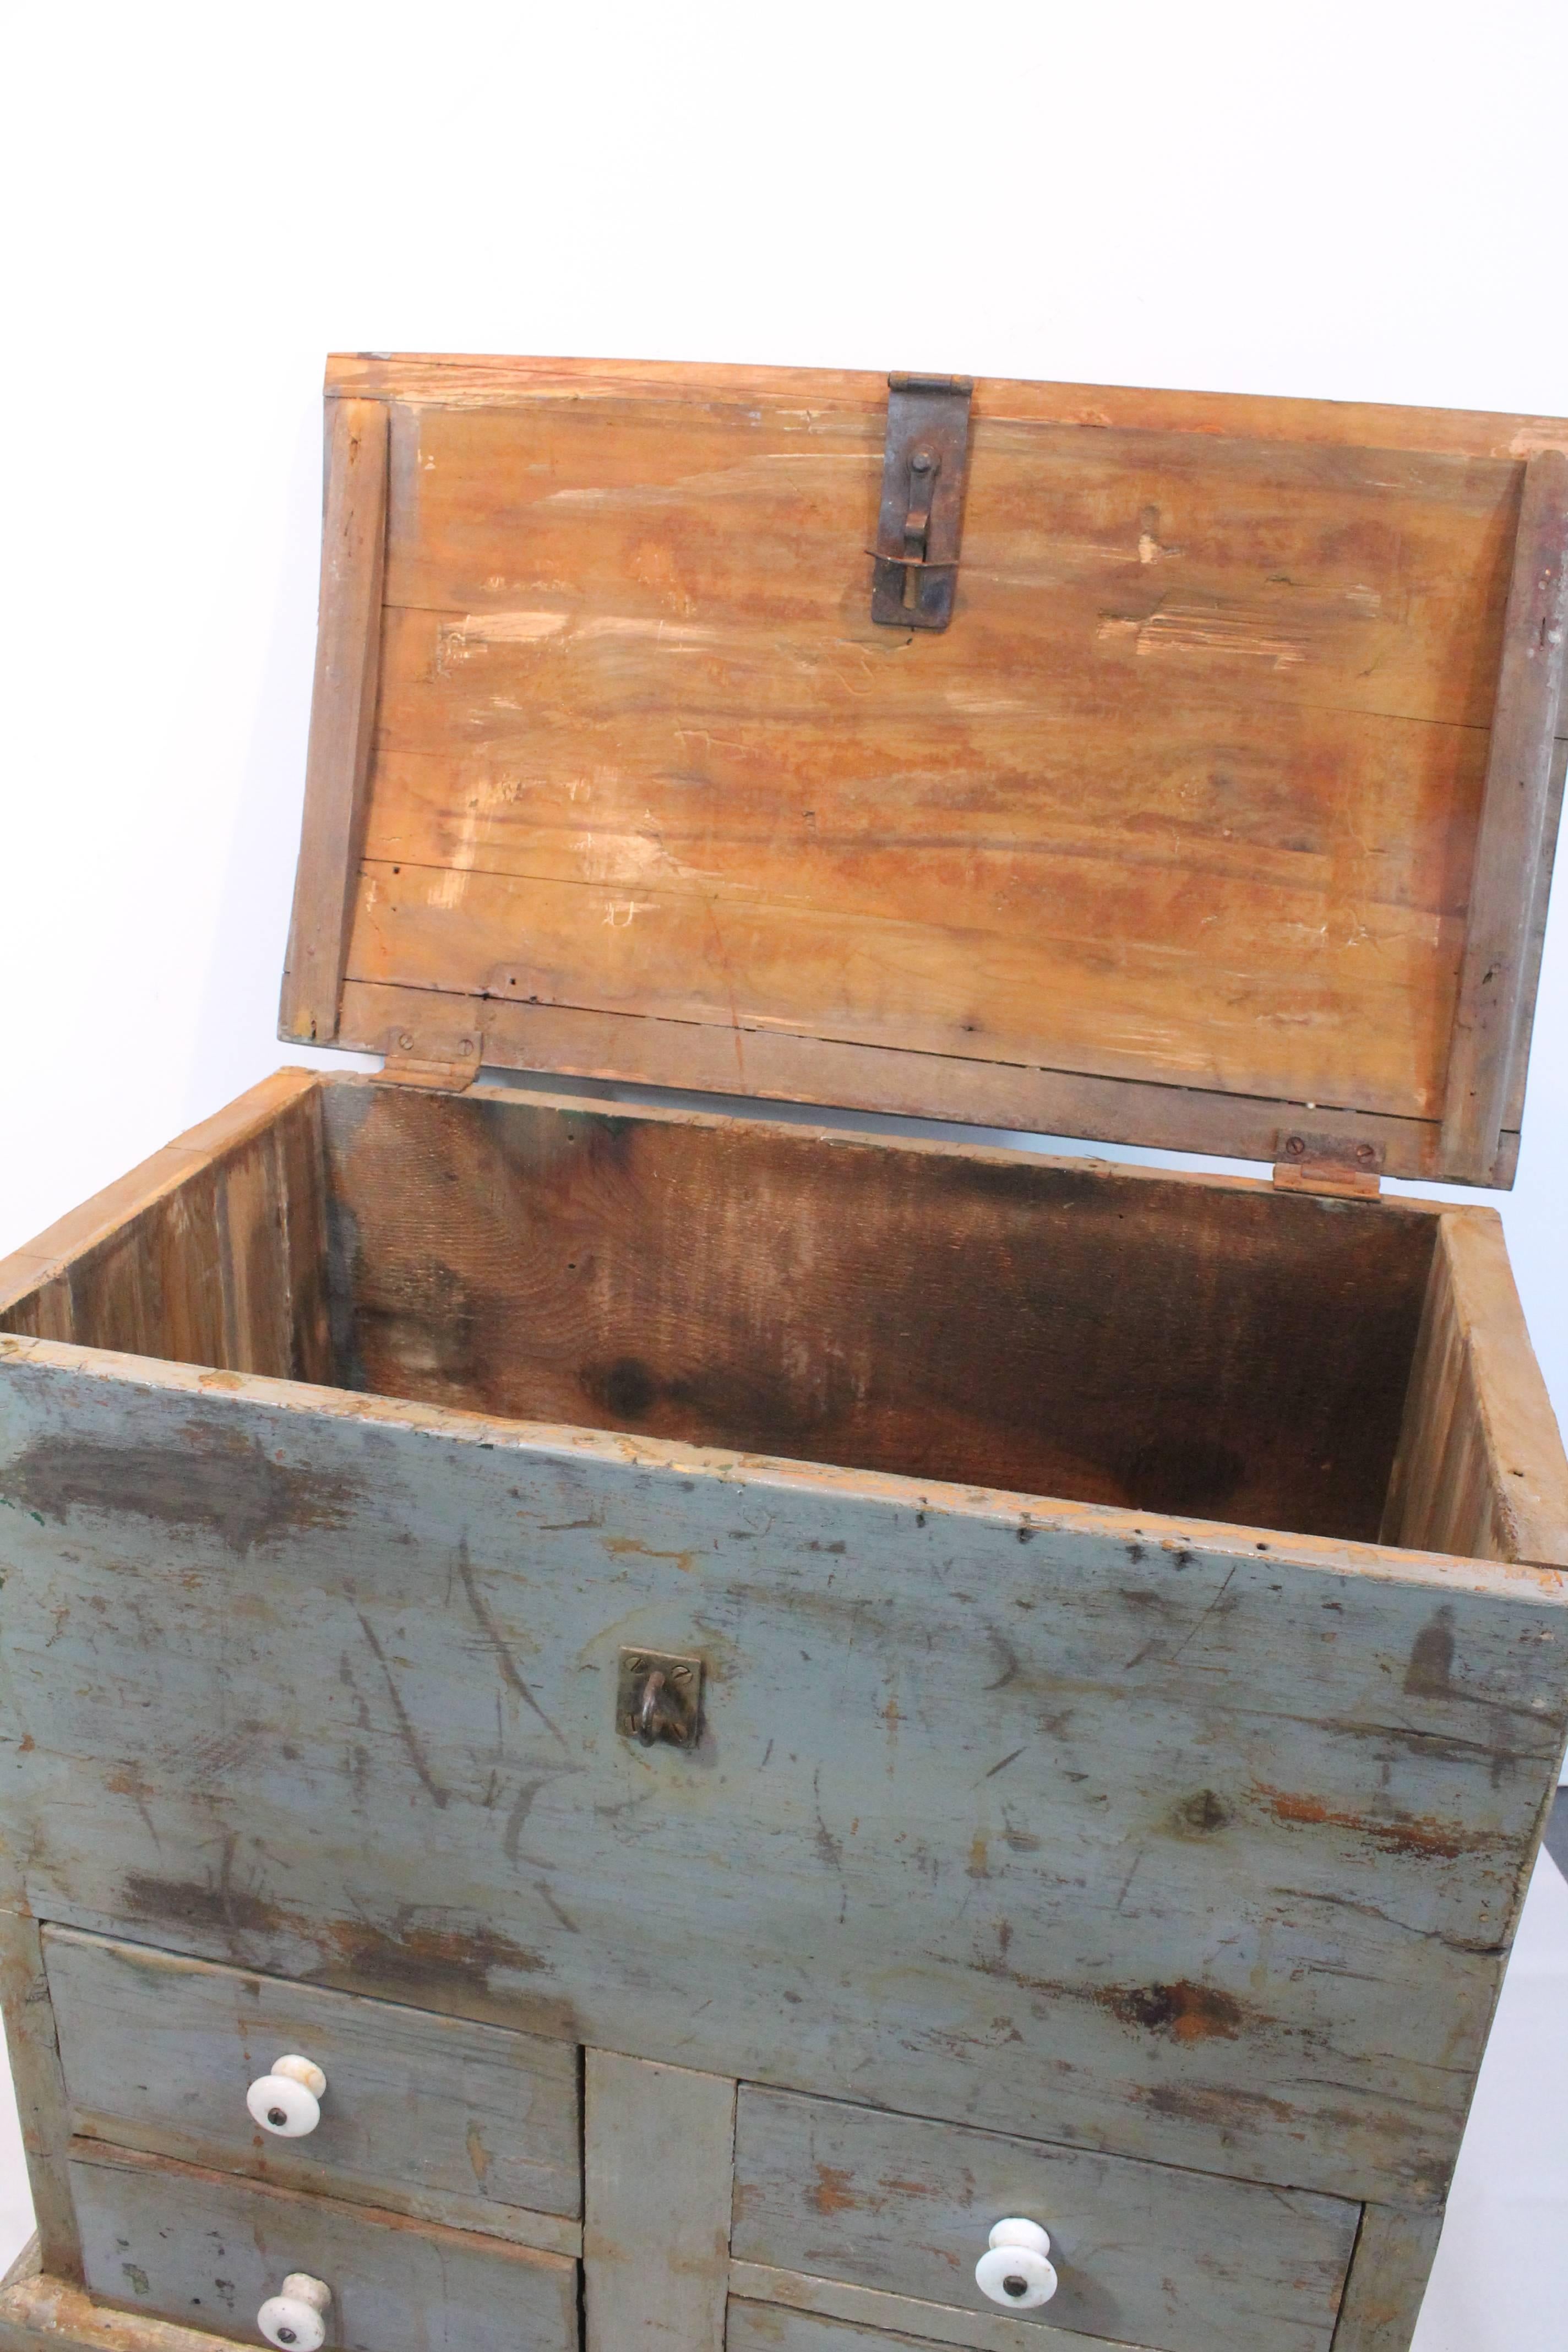 Wonderful distressed painted surface on the large-scale carpenters carrying tool box / trunk with four porcelain pull drawers and a subtle domed top.
Wonderful iron hinged lock opens the top to reveal the inner storage compartment.
 